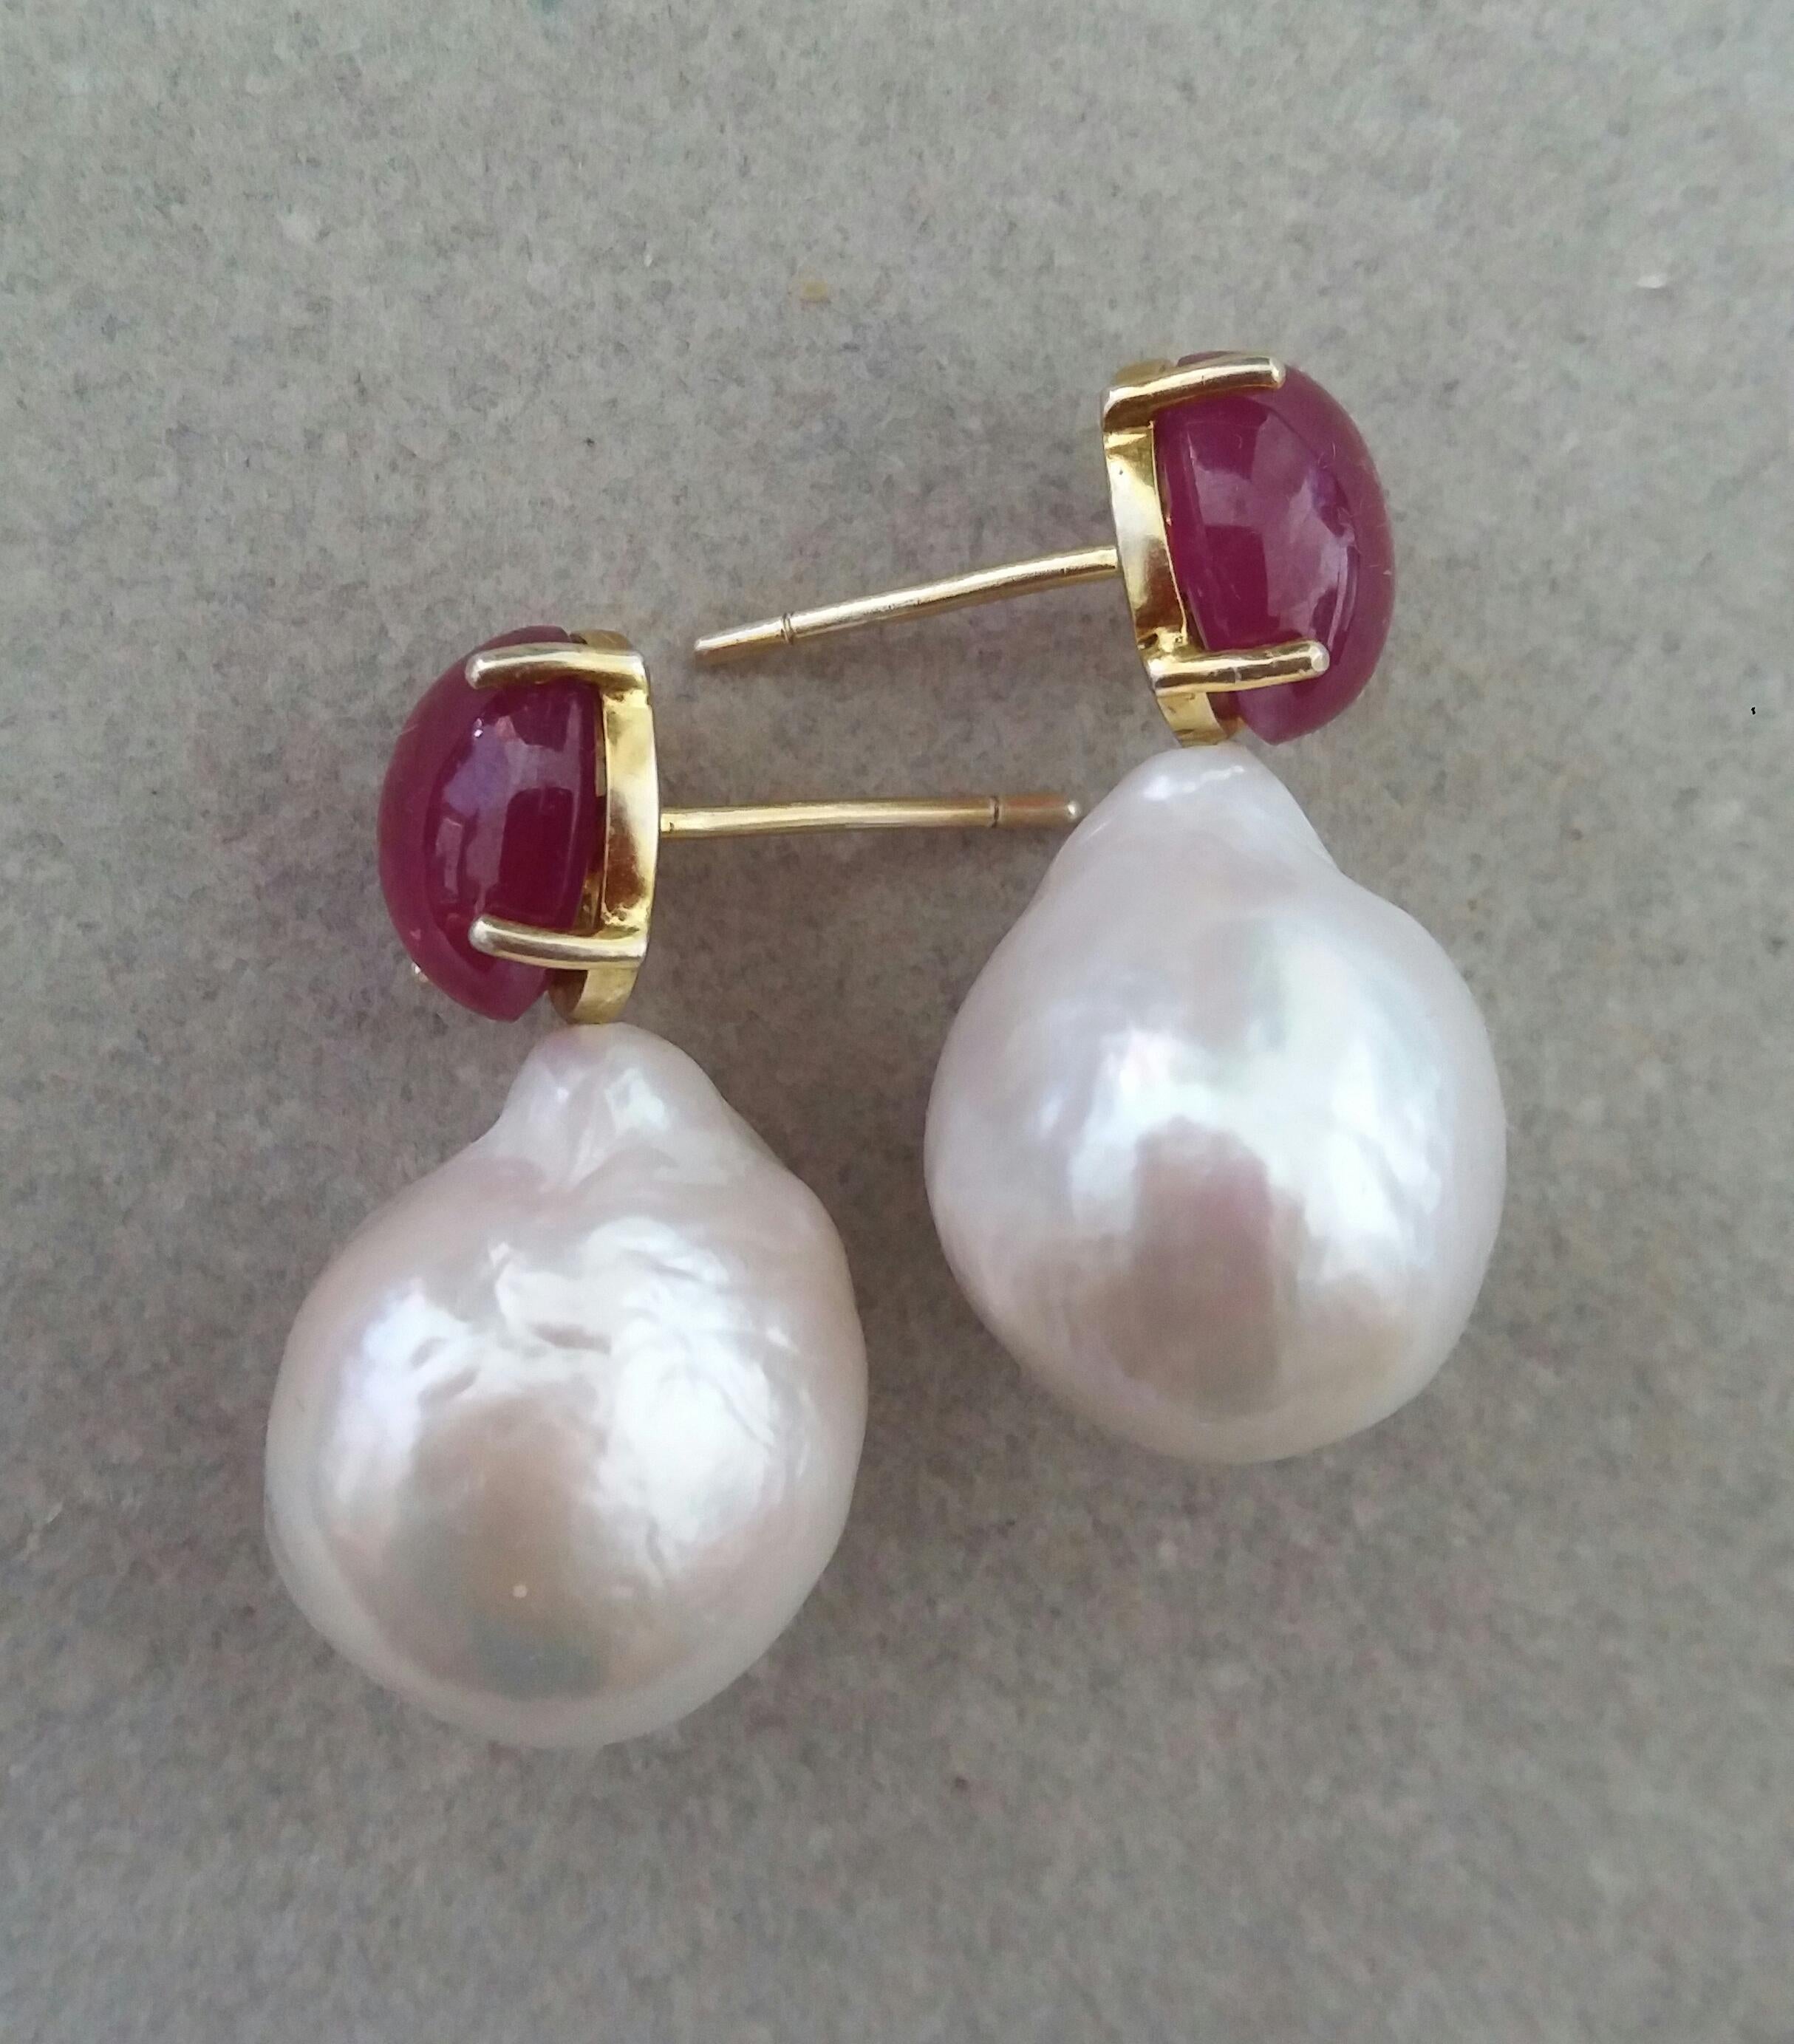 Oval Cut Big Size White Baroque Pearls Oval Ruby Cabochon 14 Carat Yellow Gold Earrings For Sale